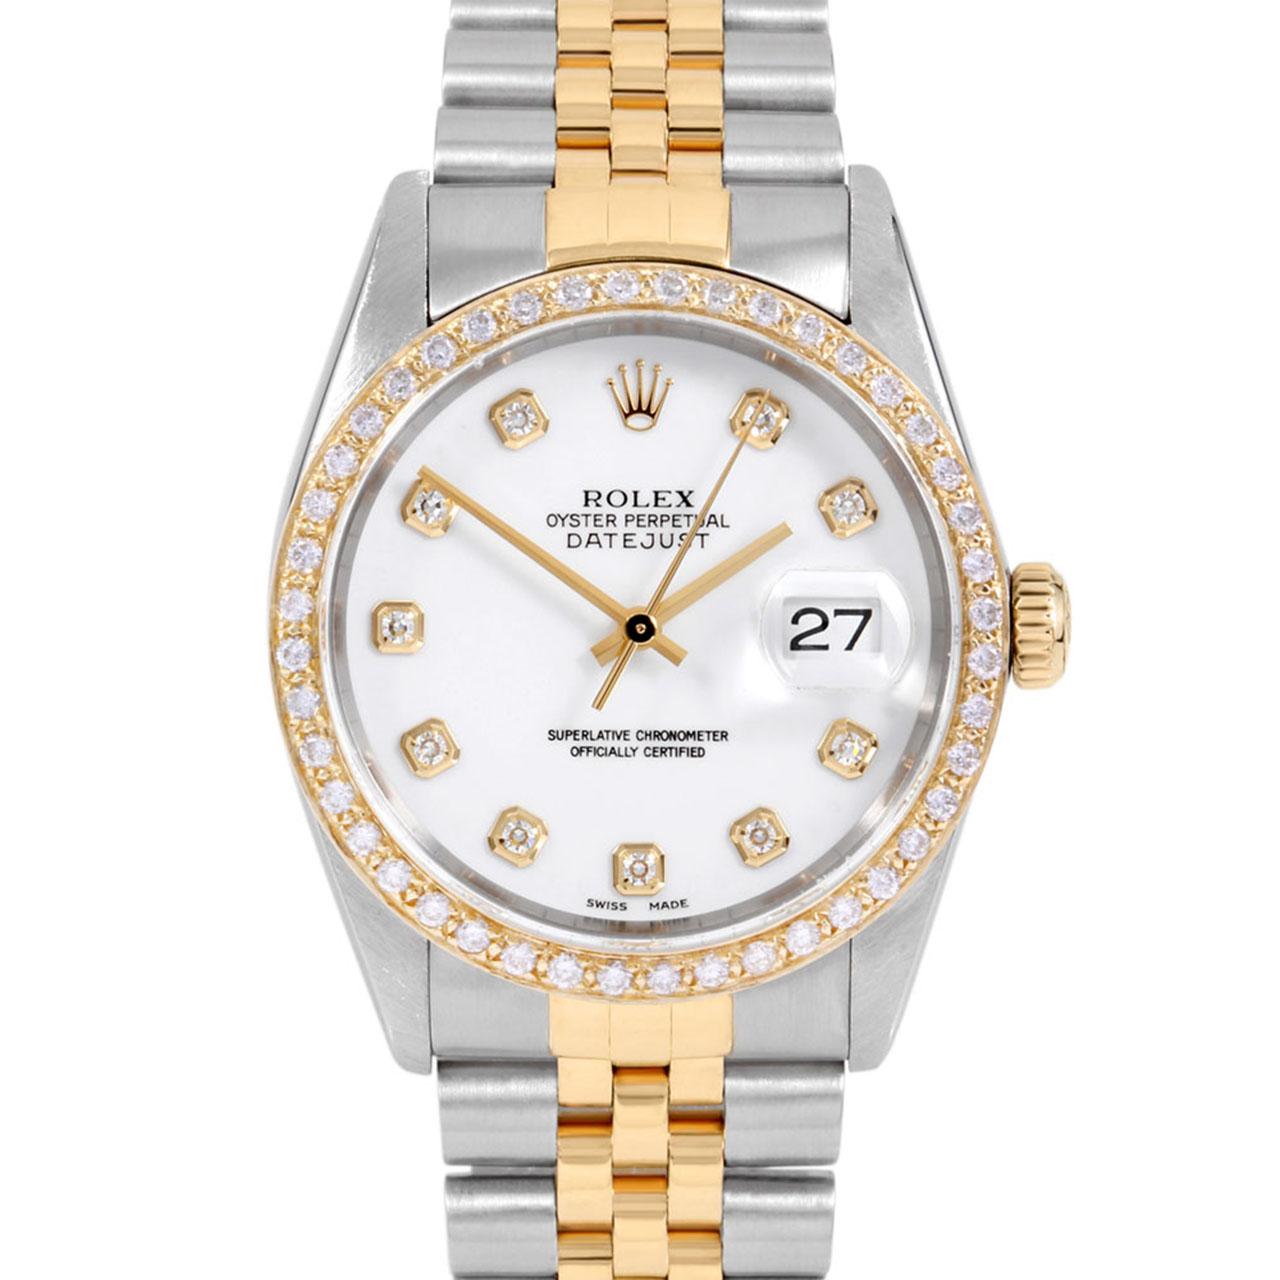 Swiss Wrist - SKU 16013-WHT-DIA-AM-BDS-JBL

Brand : Rolex
Model : Datejust Ref# 16013 - Plastic Quickset Model 
Gender : Mens
Metals : 14K Yellow Gold/ Stainless Steel
Case Size : 36 mm
Dial : Custom White Diamond Dial (This dial is not original